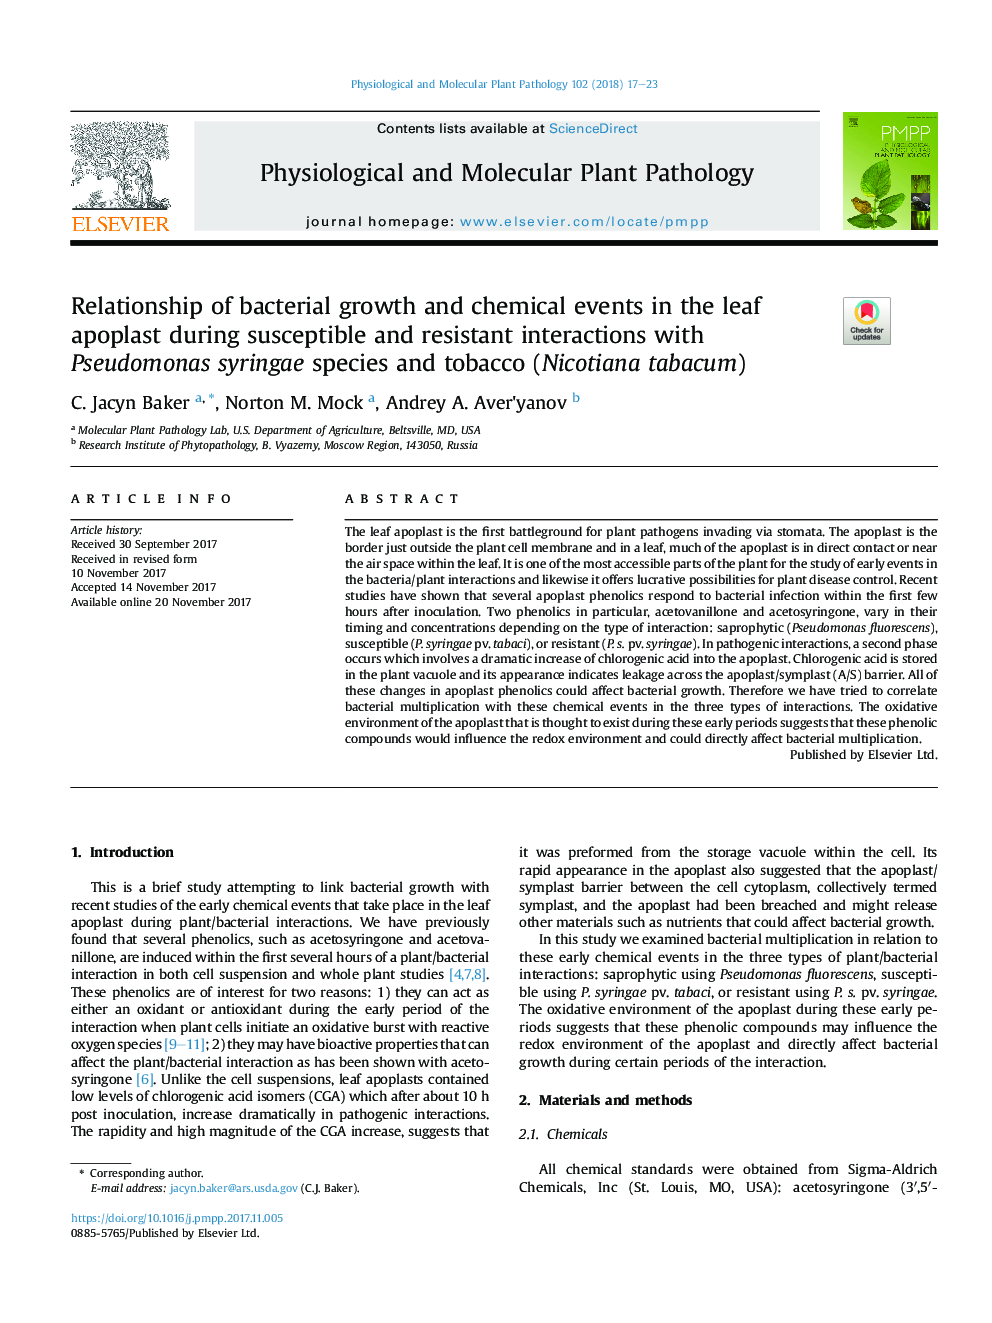 Relationship of bacterial growth and chemical events in the leaf apoplast during susceptible and resistant interactions with Pseudomonas syringae species and tobacco (Nicotiana tabacum)